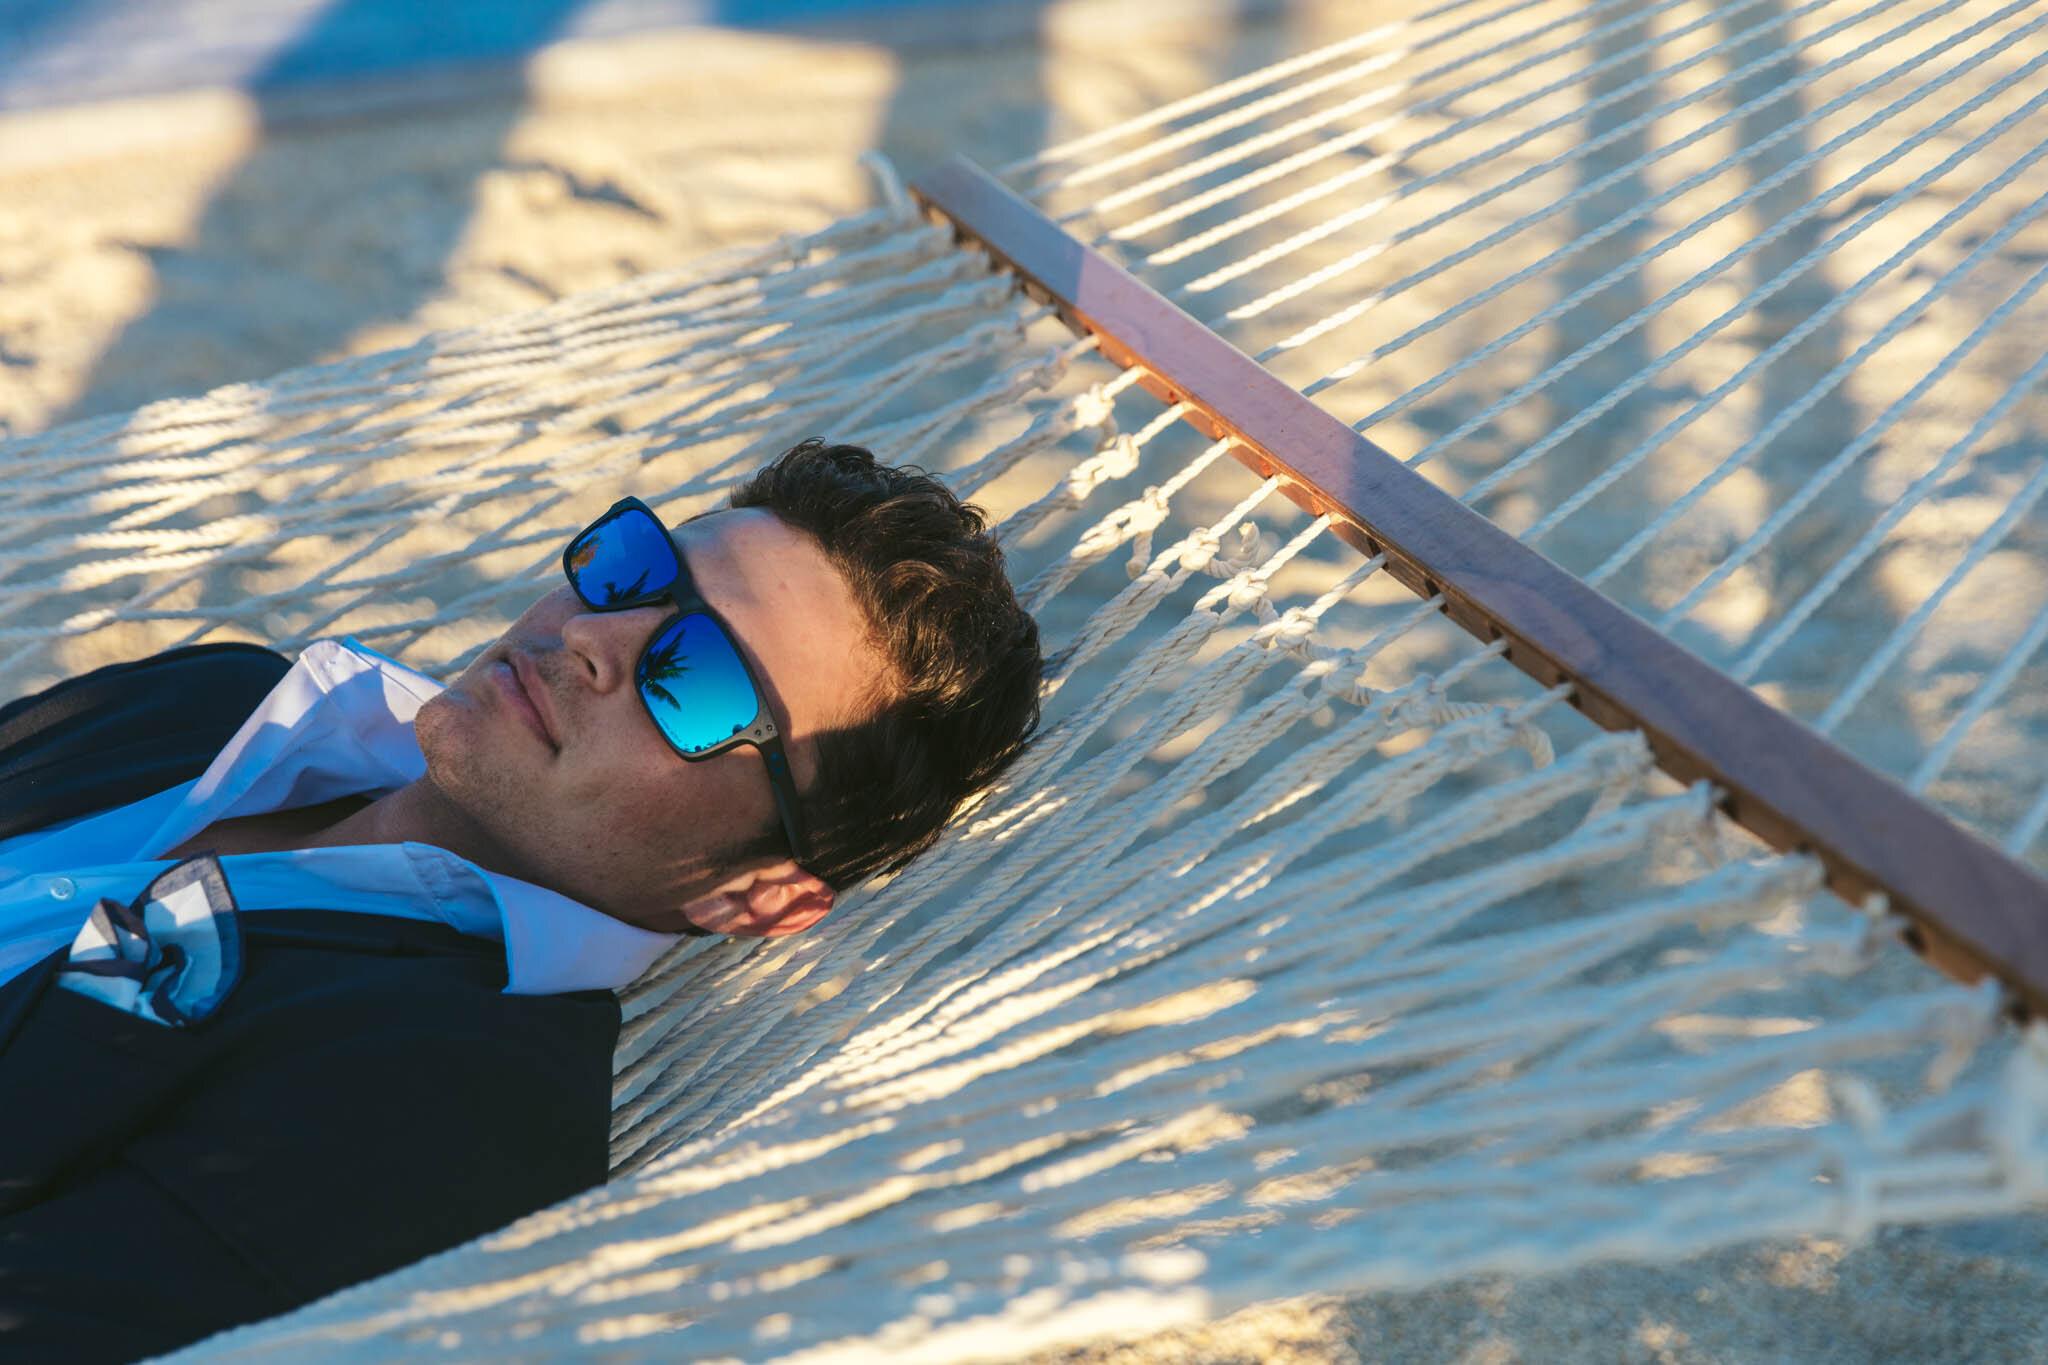  Groom wearing sunglasses and a wedding tuxedo lies relaxing on a hammock on The Islands of Islamorada’s private beach. 